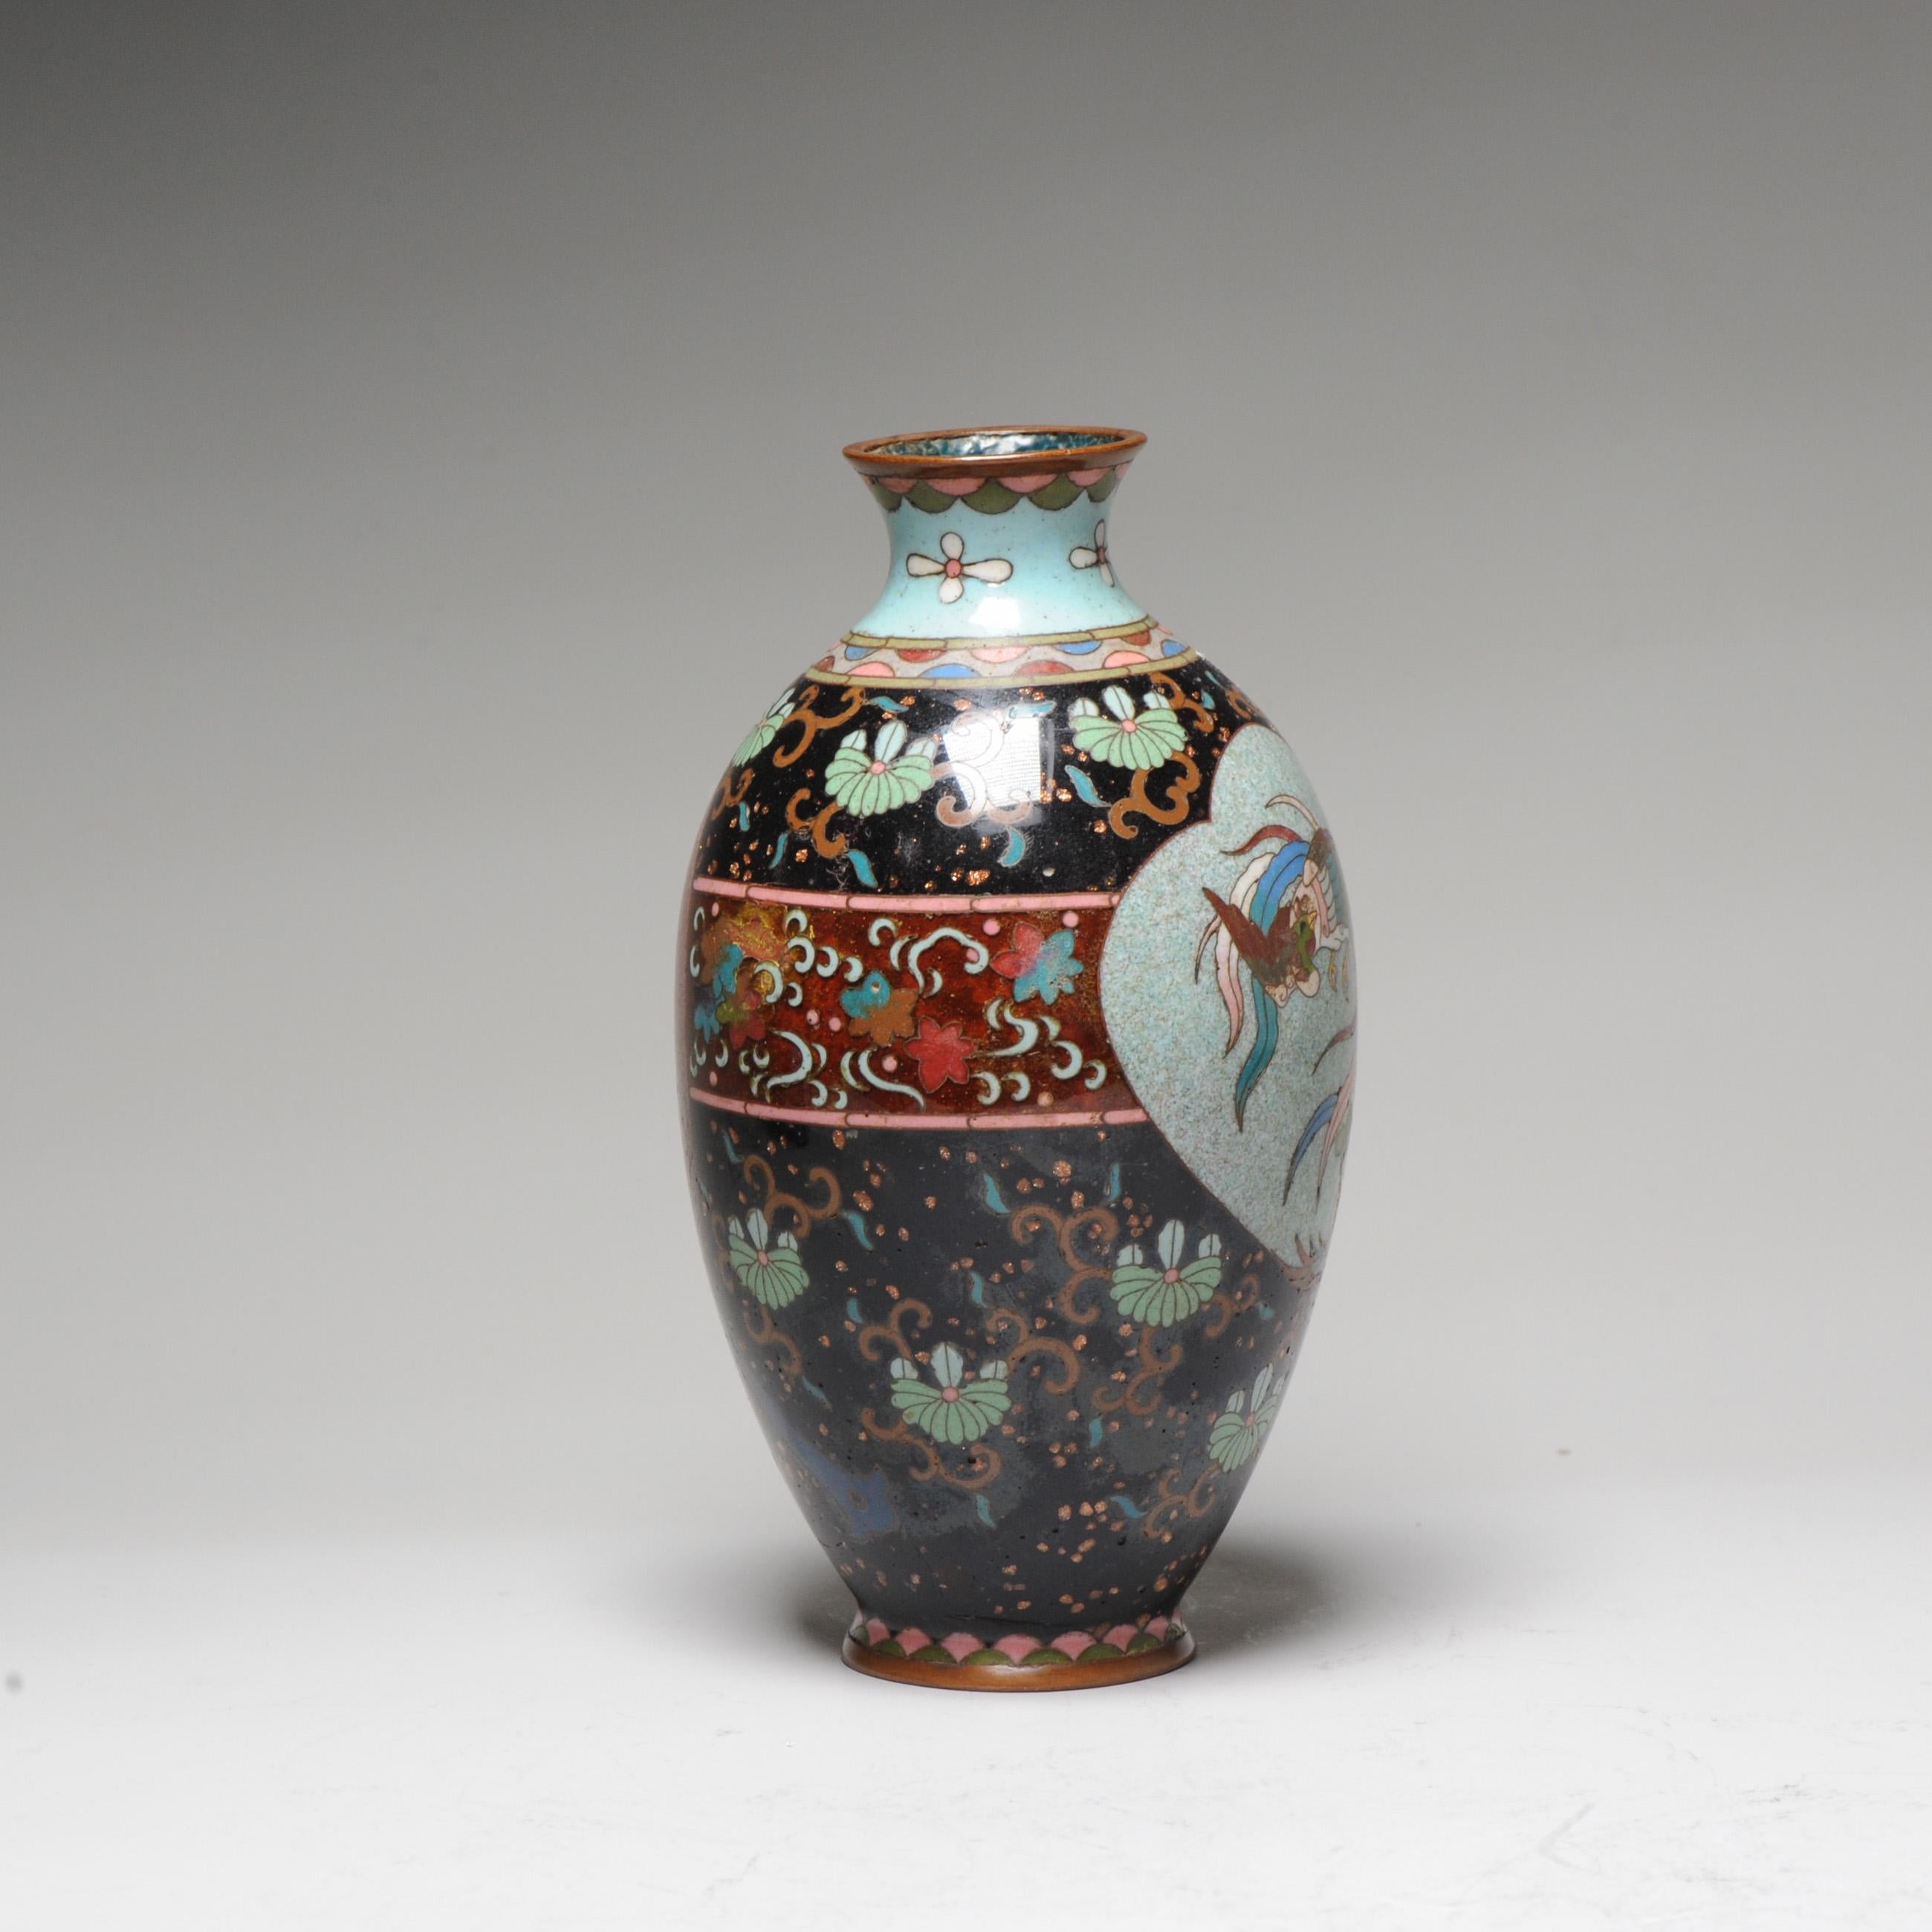  Top Quality 19c Antique Japanese Qing Period Bronze Cloisonne Vase In Excellent Condition For Sale In Amsterdam, Noord Holland